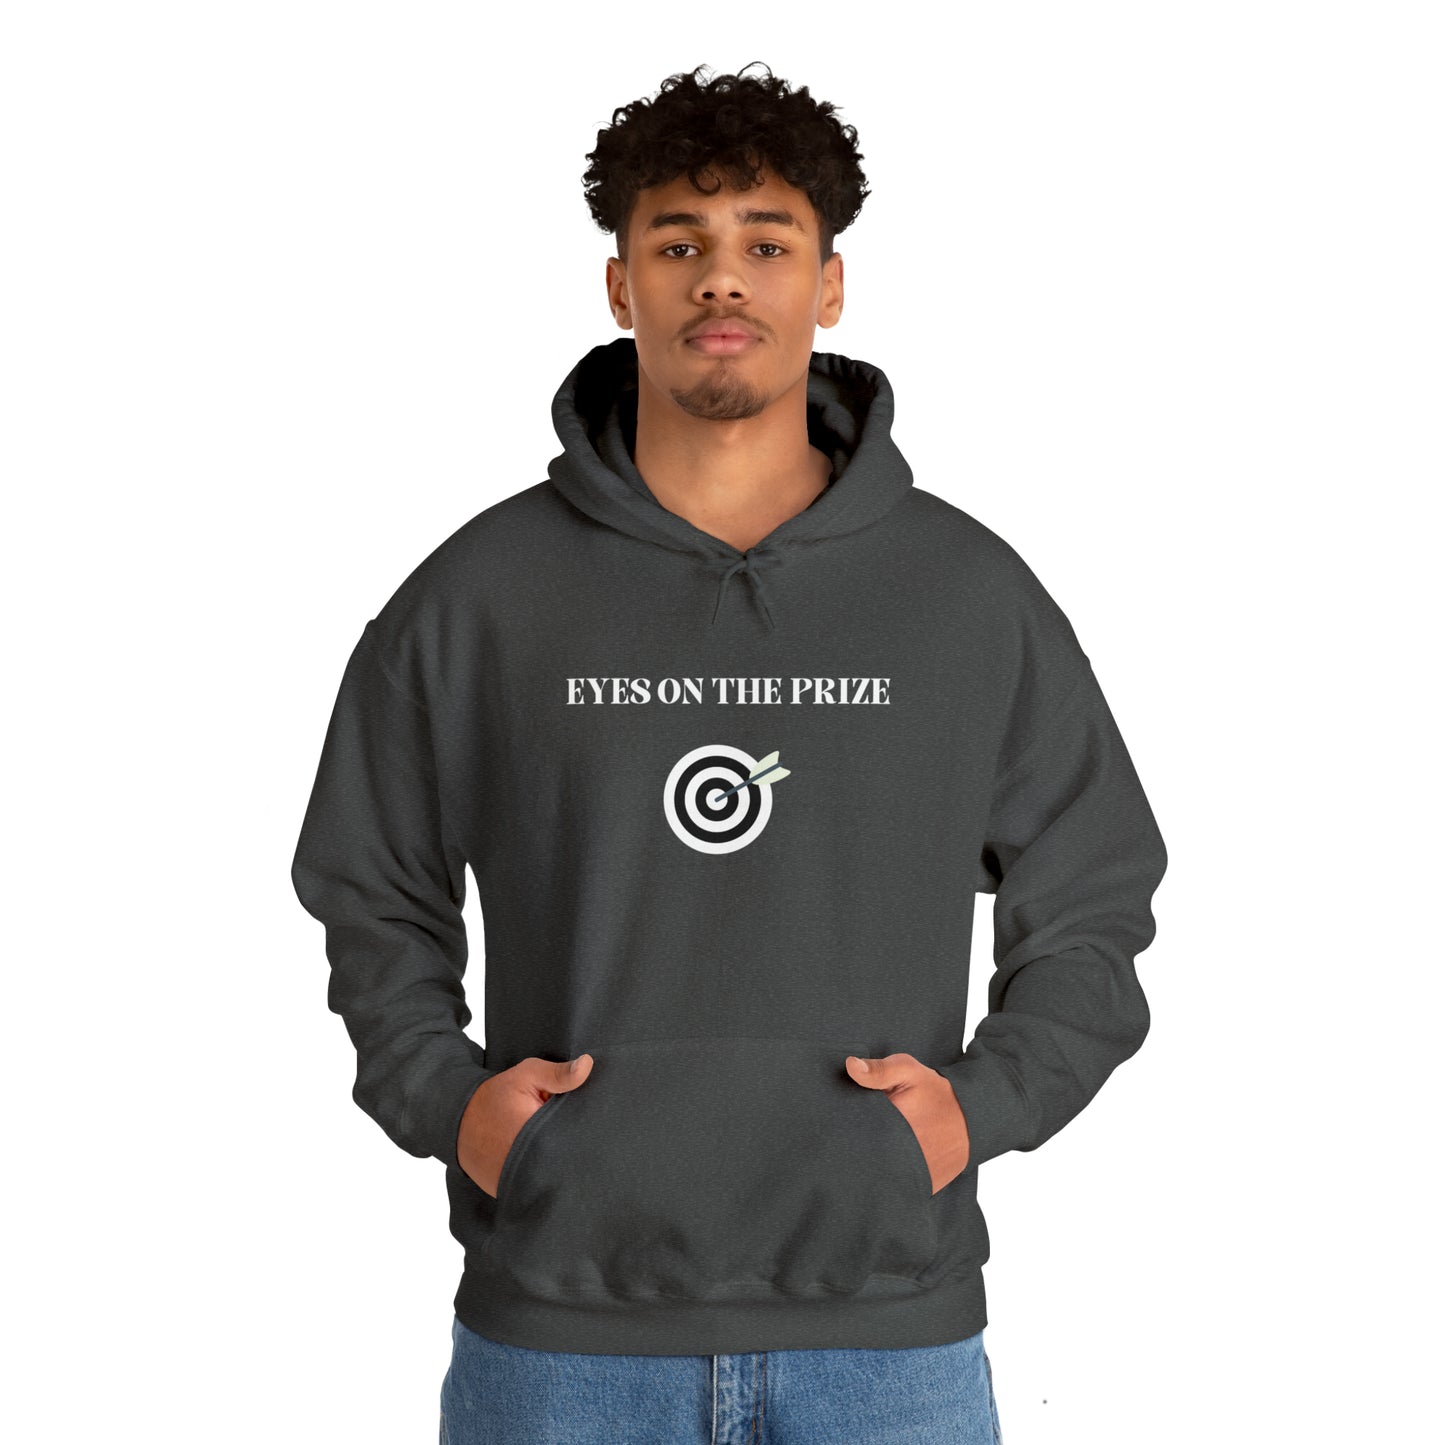 Eyes on the prize Blend Hooded Sweatshirt gift, inspirational words hoodie gift, sweatshirt gift that eacourages